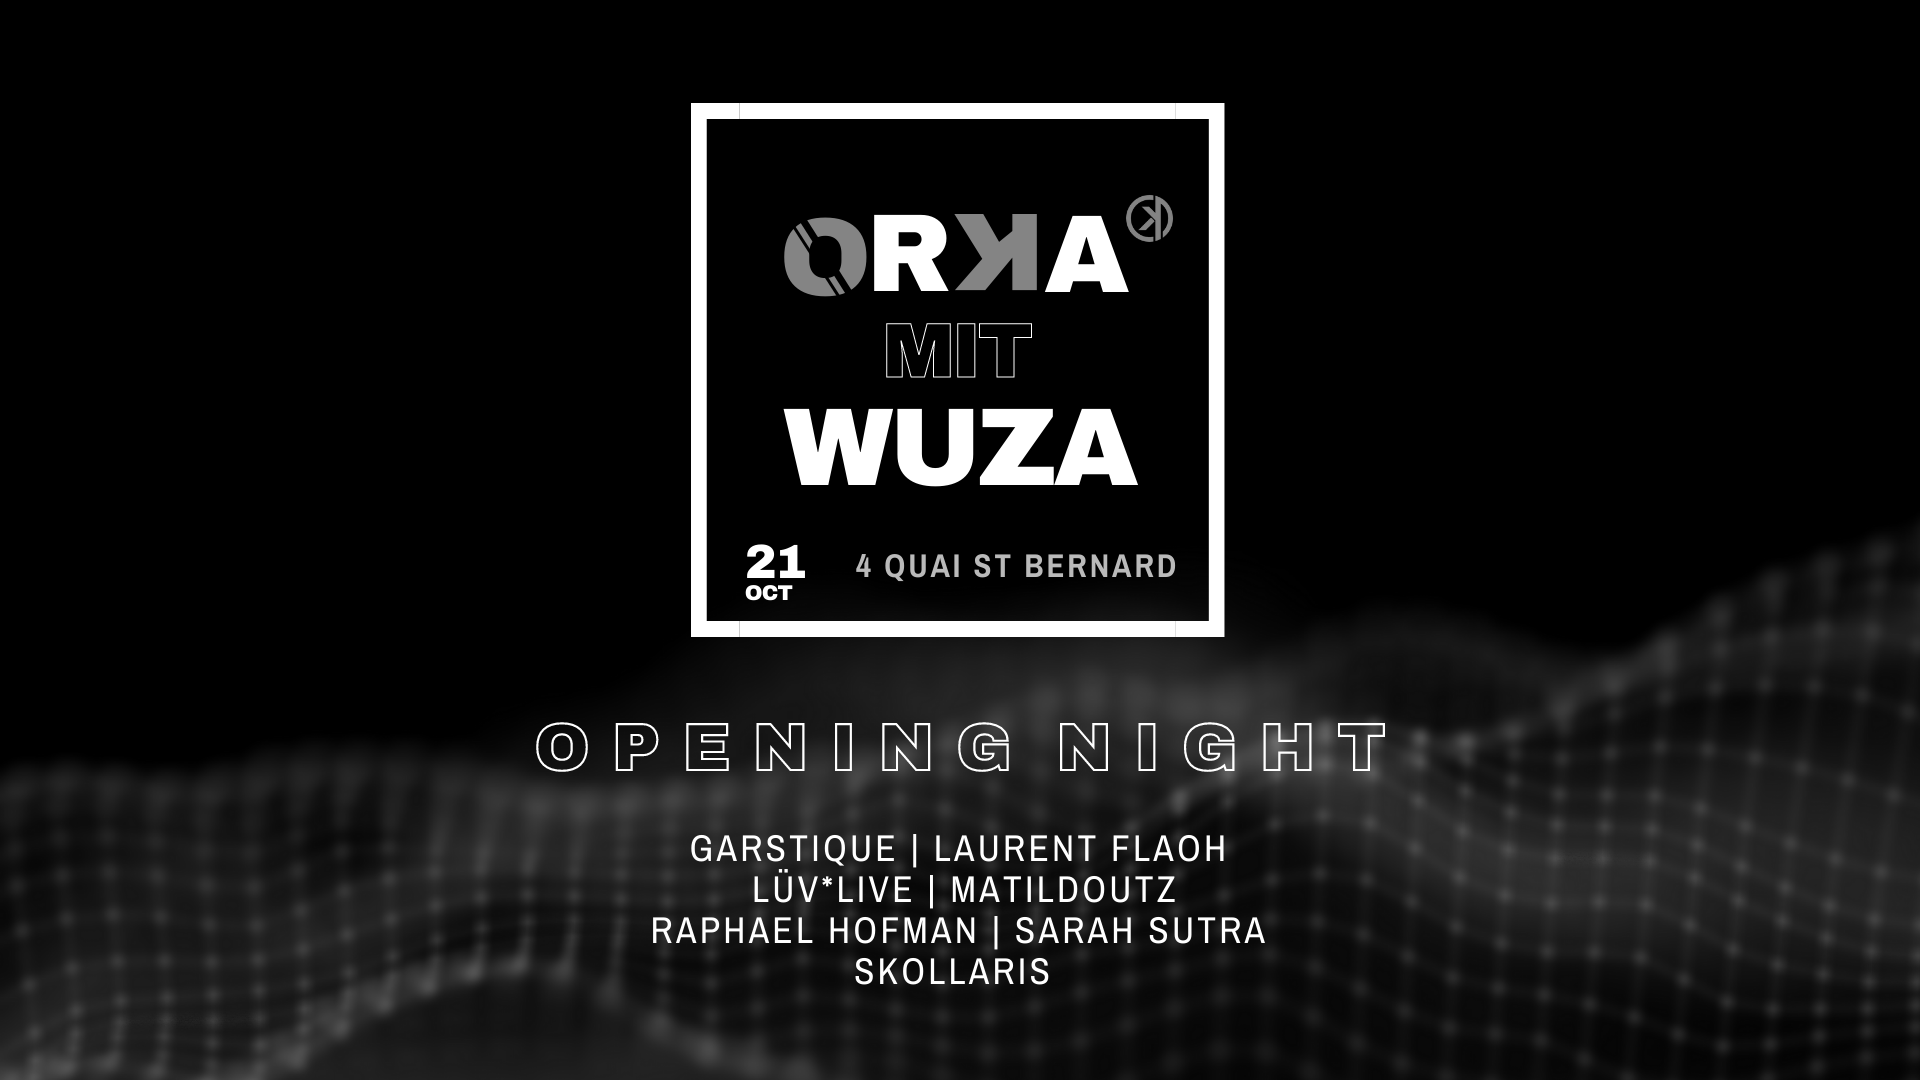 Orka mit WUZA: OPENING PARTY - フライヤー表